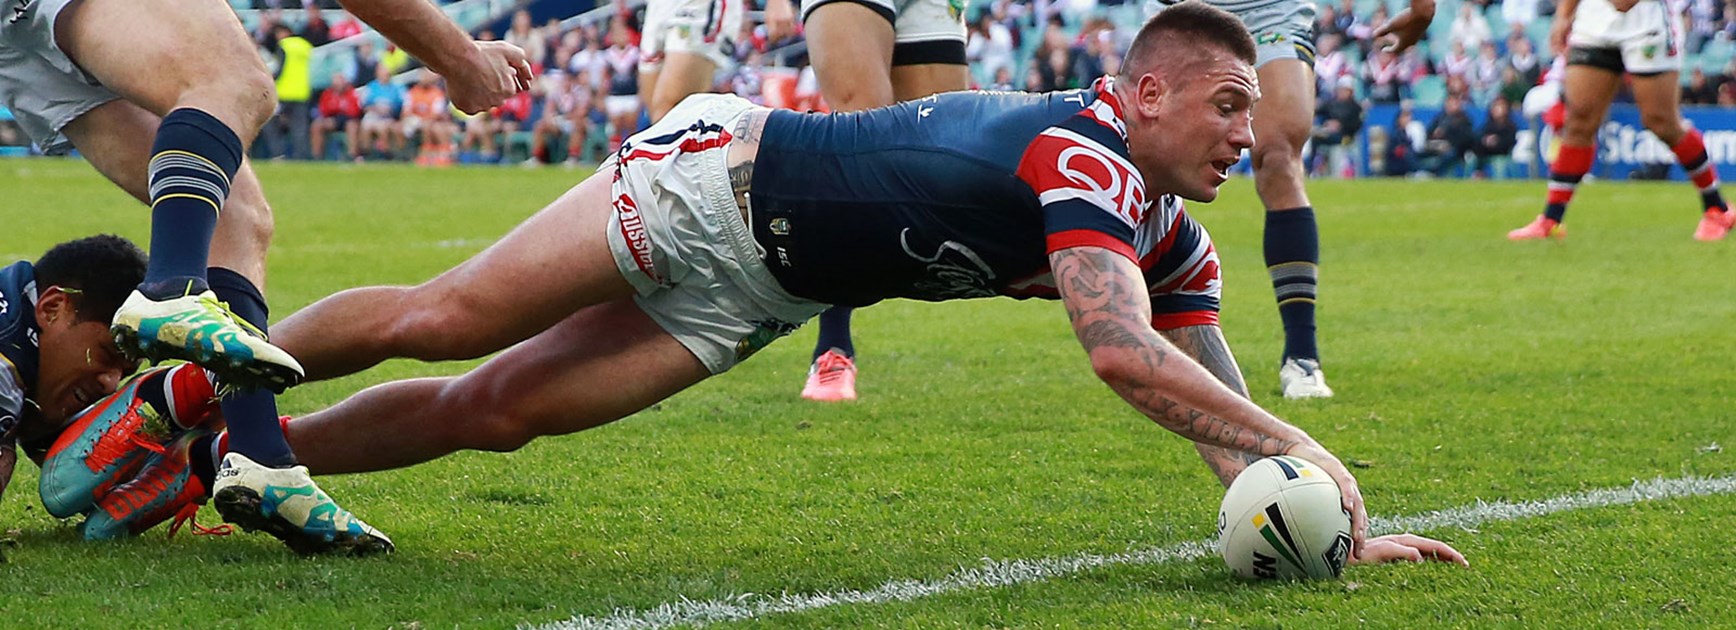 Roosters centre Shaun Kenny-Dowall scored a try against the Cowboys in Round 23.